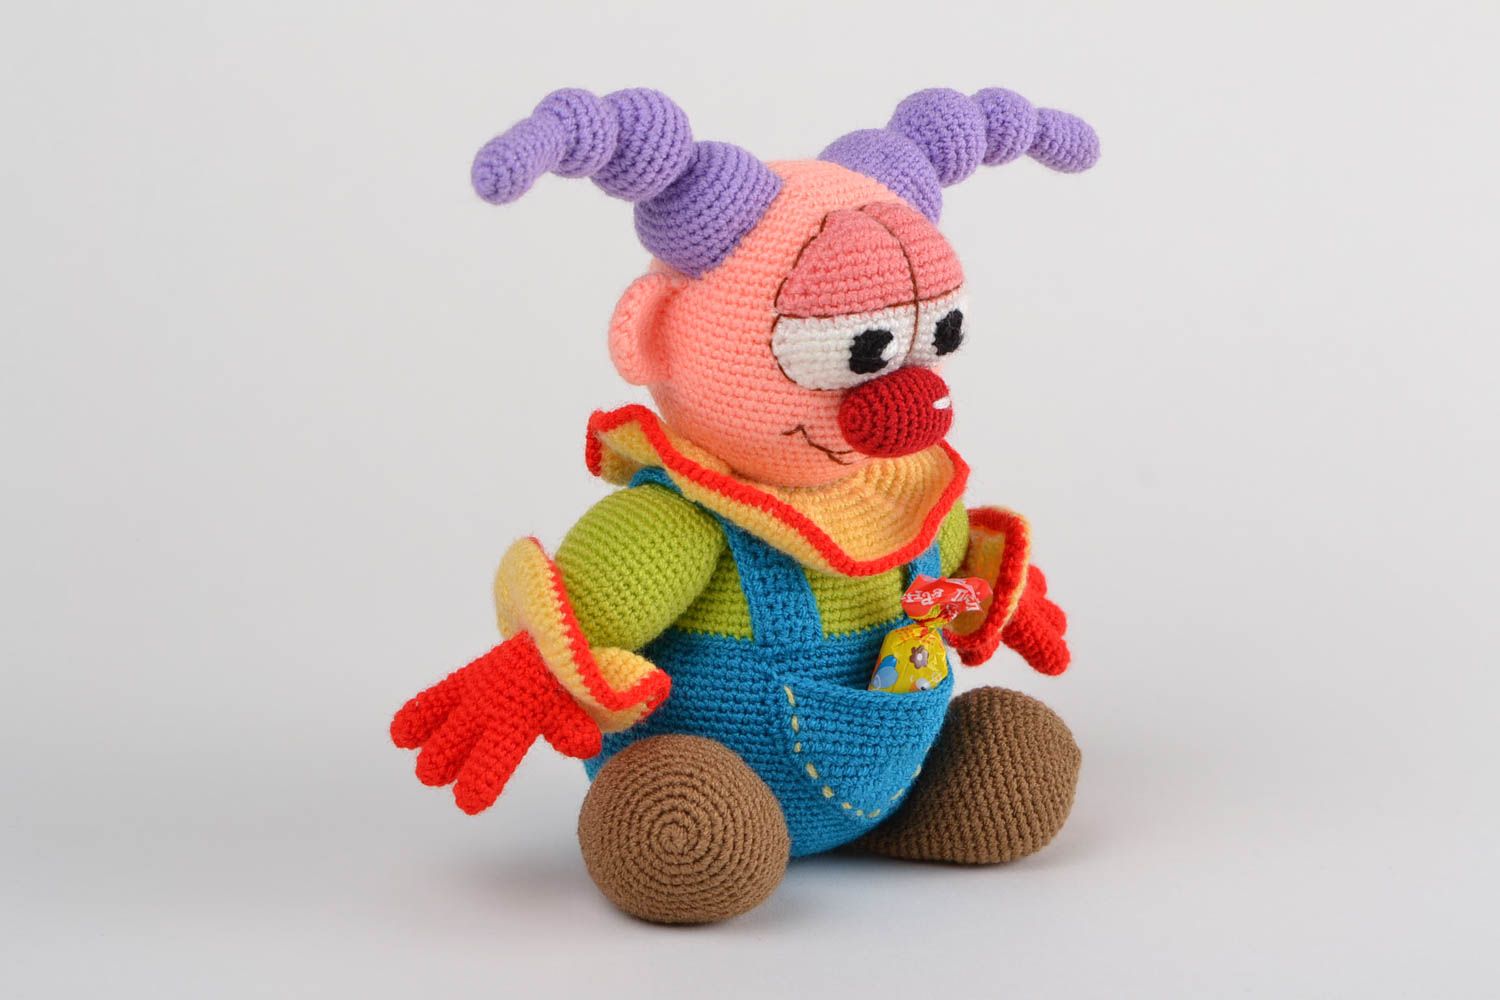 Handmade designer soft toy crocheted of acrylic threads colorful bright clown photo 4